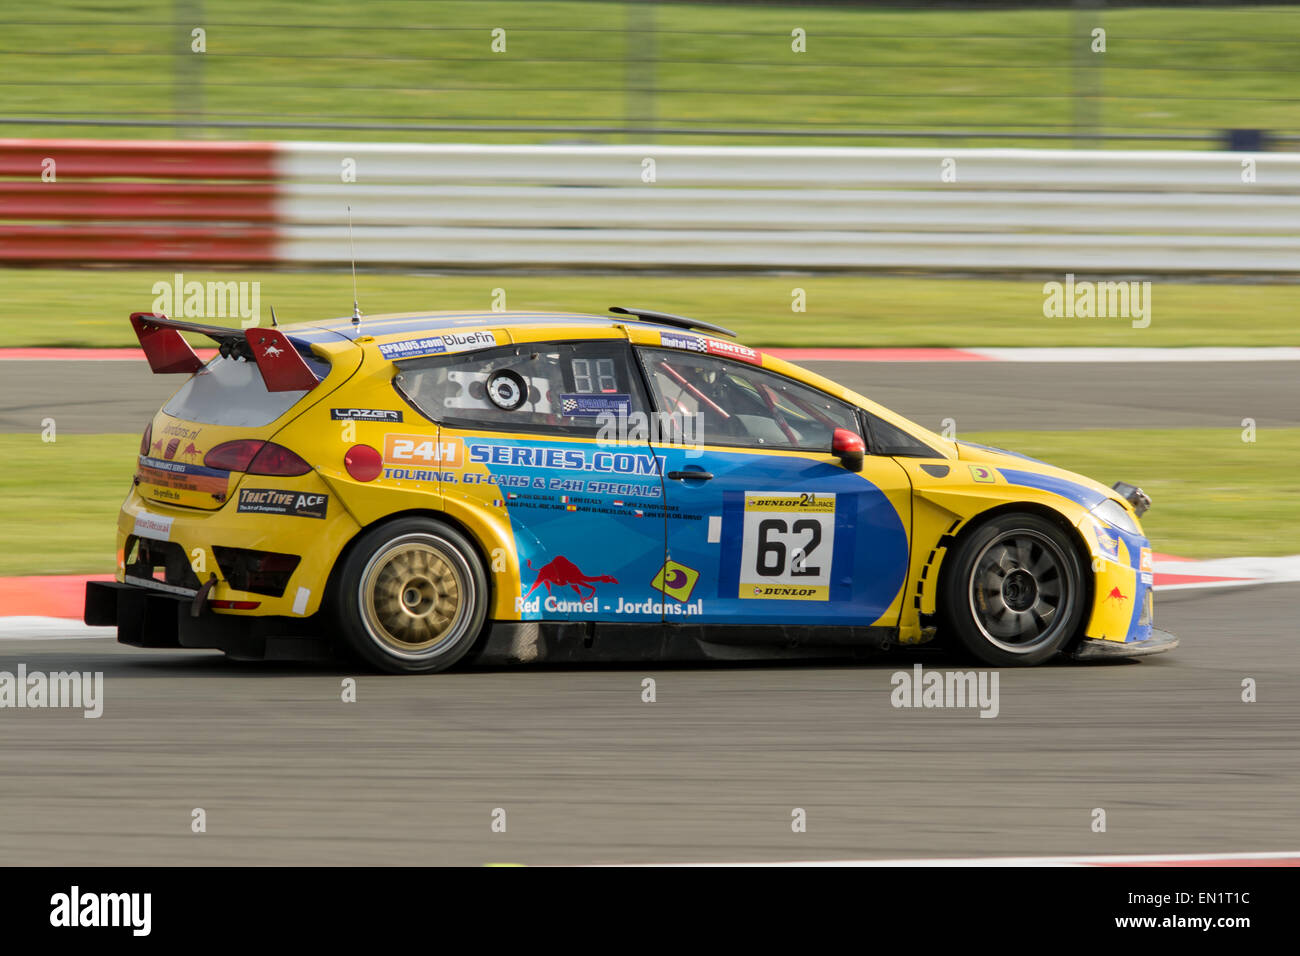 Silverstone, Towcester, UK. 25th April, 2015. Team Red Camel / Jordans.nl Seat Leon during the Dunlop 24 Hours Race at Silverstone Credit:  Gergo Toth/Alamy Live News Stock Photo